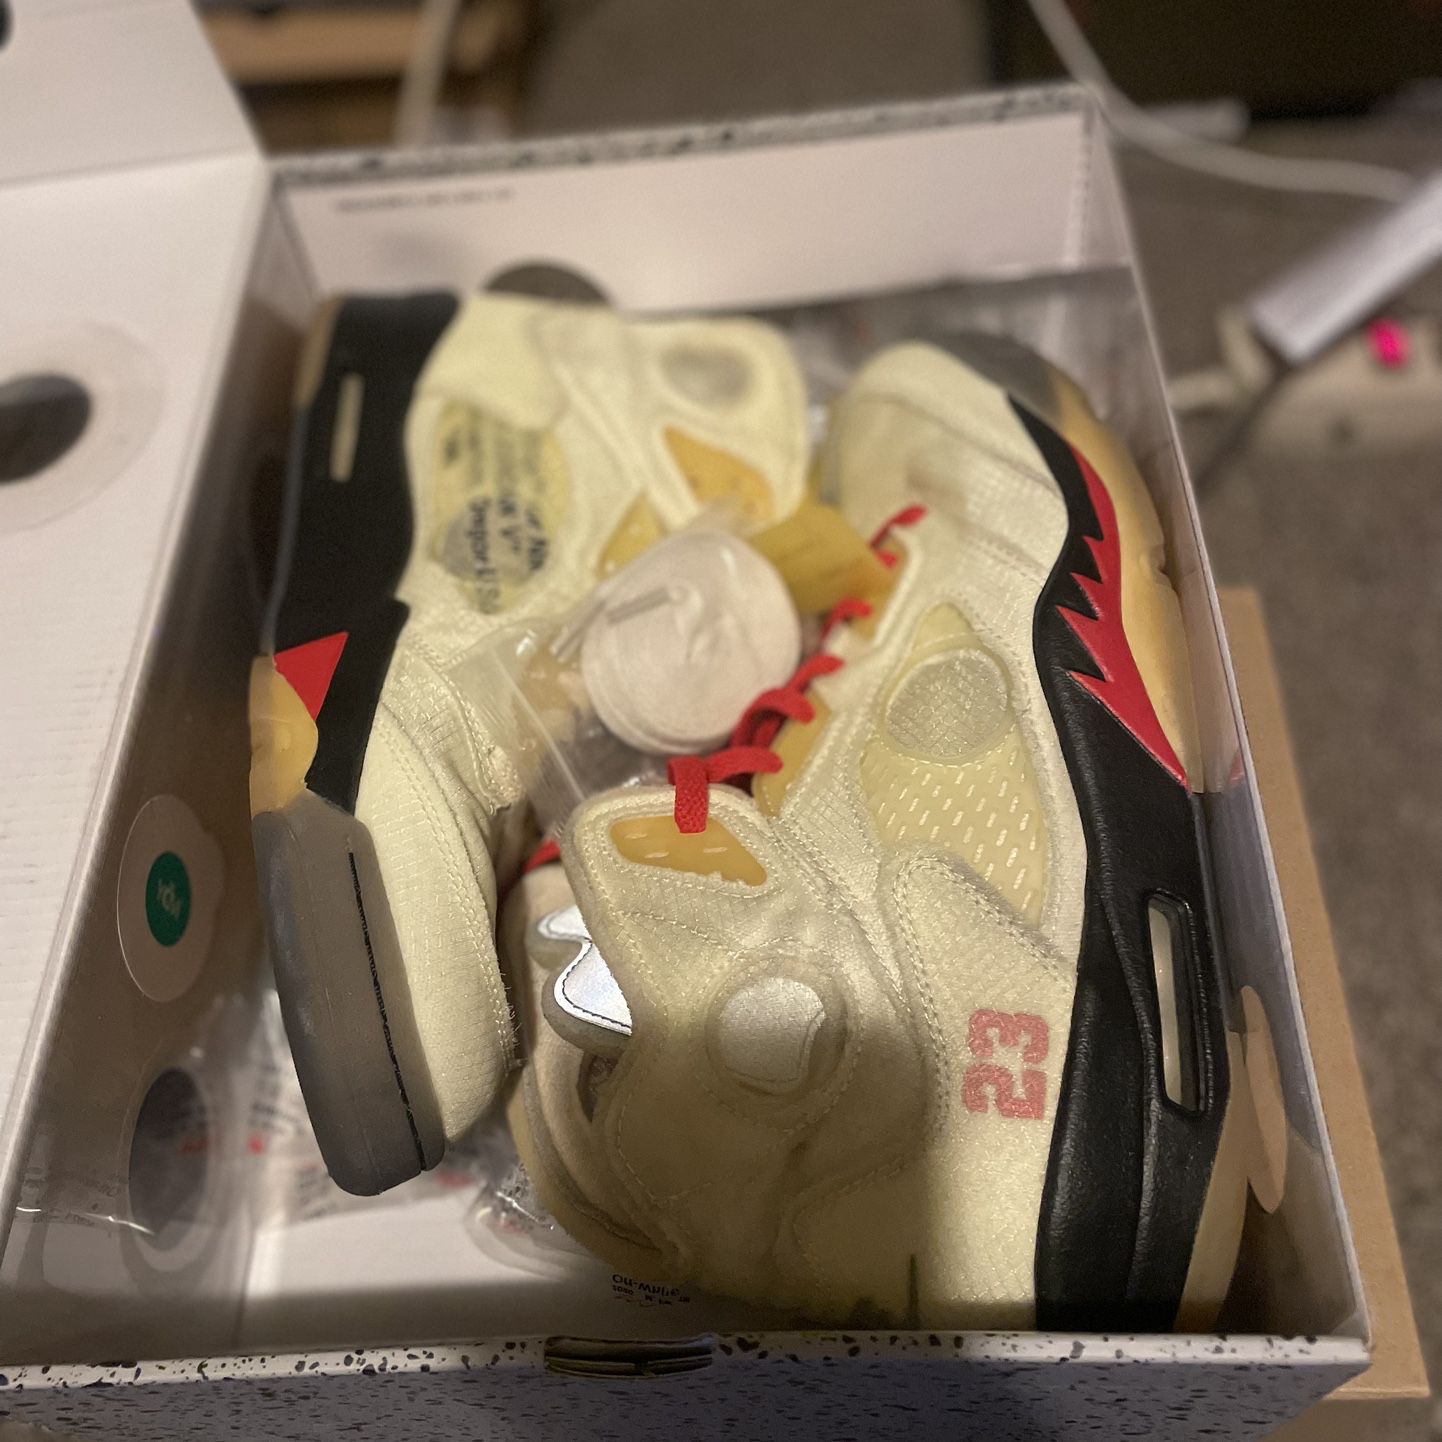 OFF WHITE NIKE AIR JORDAN 5 RETRO MUSLIN RED BLACK SAIL WHITE NEW SALE  SNEAKERS SHOES BOX MEN SIZE 11 45 A3 for Sale in Miami, FL - OfferUp